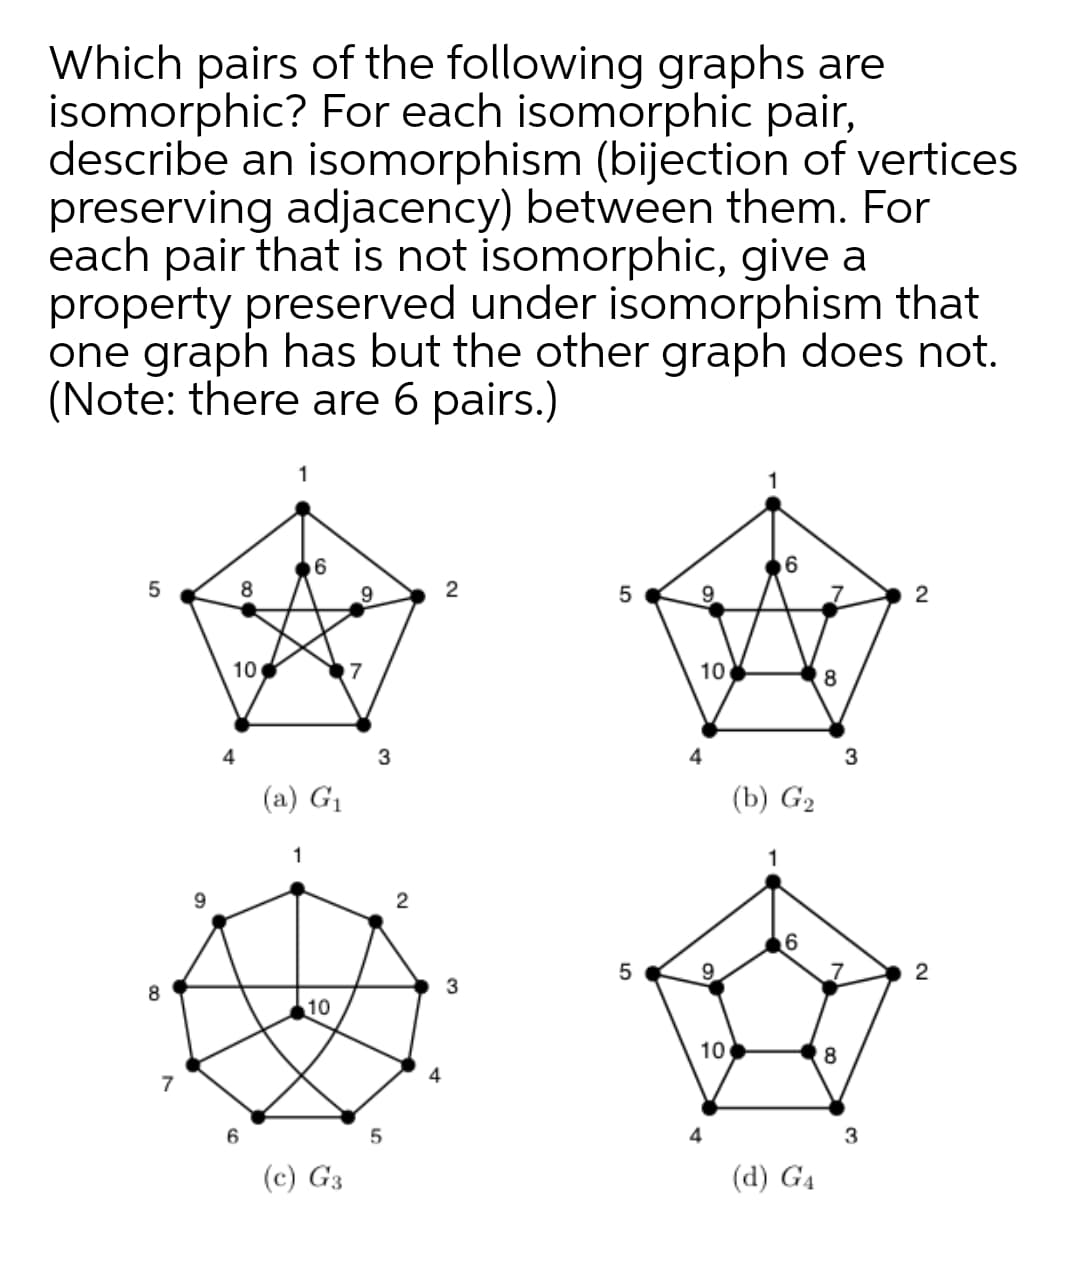 Which pairs of the following graphs are
isomorphic? For each isomorphic pair,
describe an isomorphism (bijection of vertices
preserving adjacency) between them. For
each pair that is not isomorphic, give a
property preserved under isomorphism that
one graph has but the other graph does not.
(Note: there are 6 pairs.)
1
6
96
8
10
10
8
4
3
3
(a) G1
(b) G2
1
2
2
8
3
10
10
8
7
6
5
4
3
(c) G3
(d) G4
6.
LO
4.
